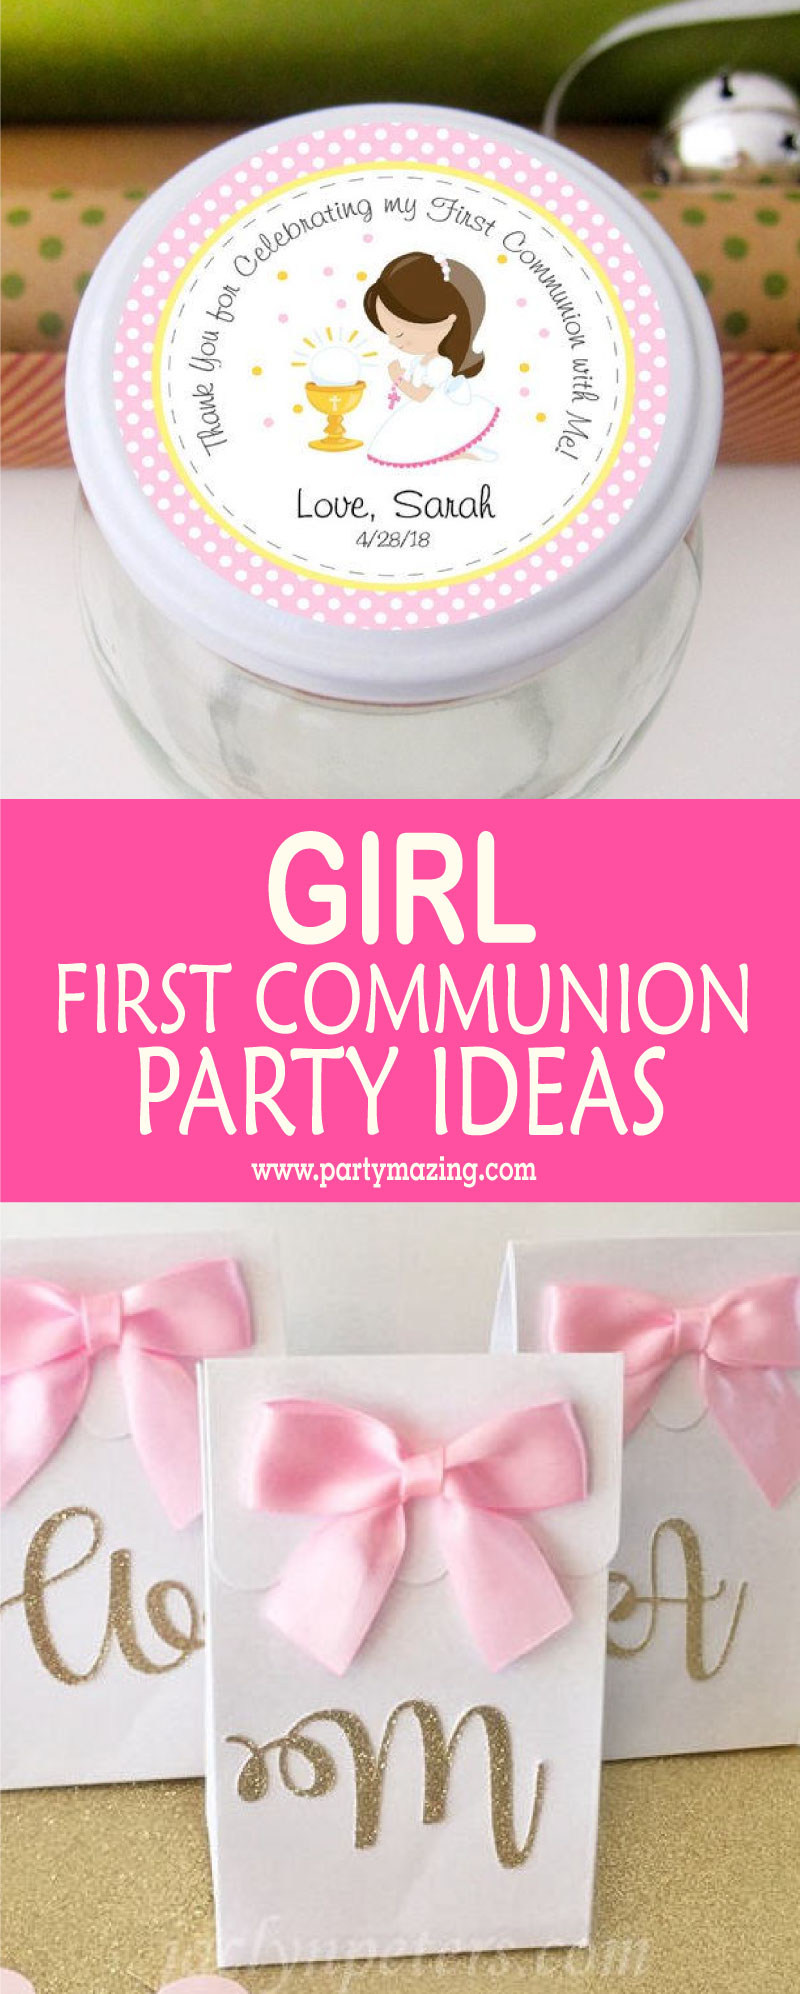 +15 Girl First Communion Party Ideas and Templates to make an amazing Party. Get inspired to create your own unforgettable celebration for your little girl.
